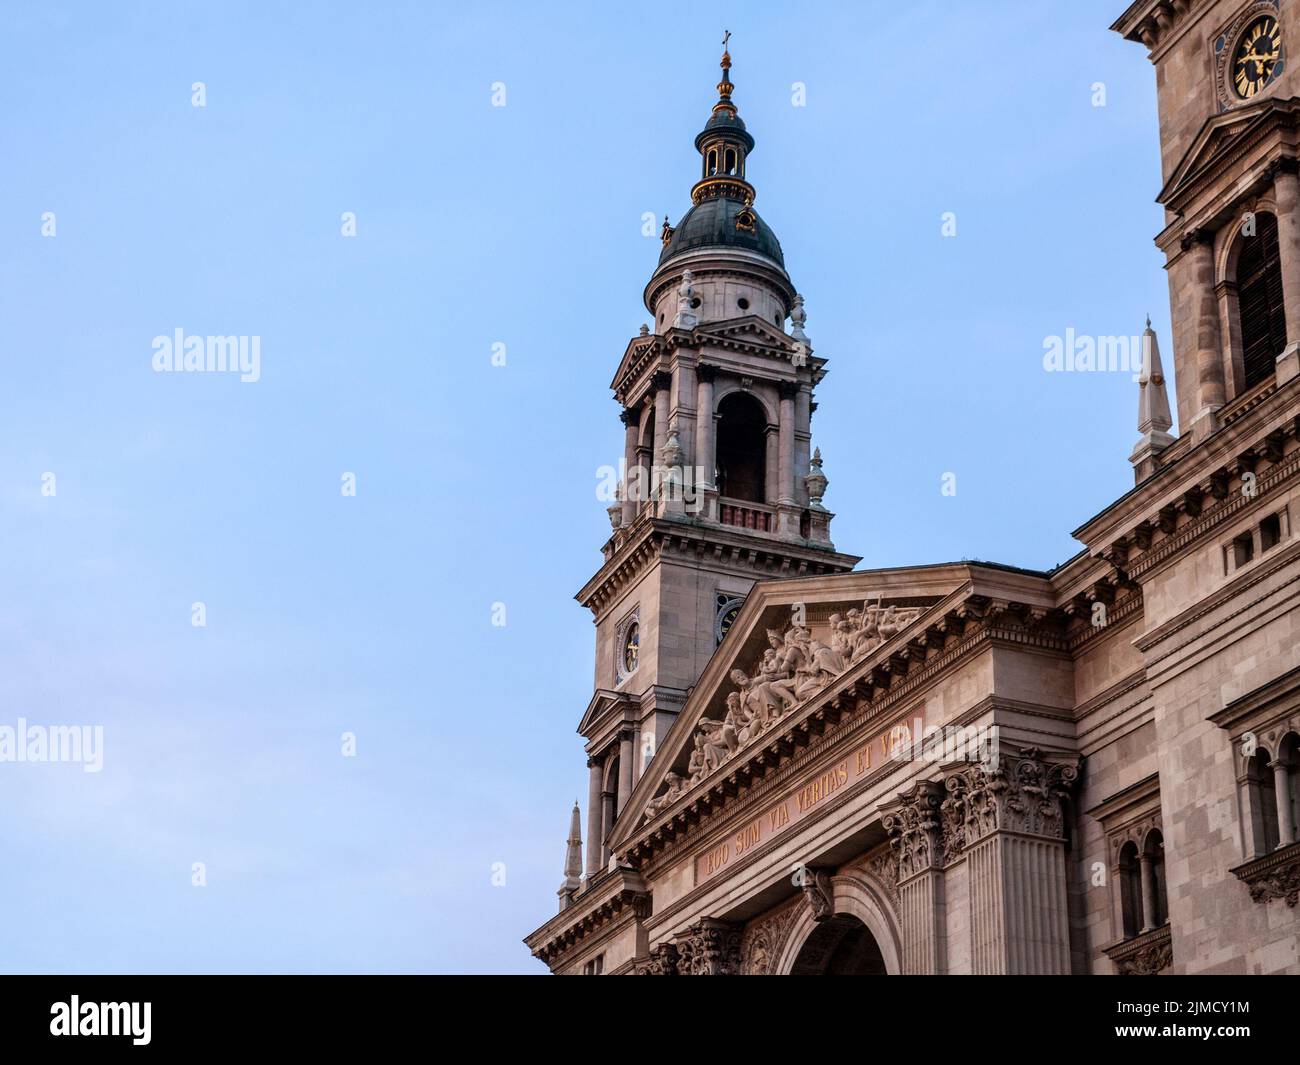 Picture of the main facade of the Szent Istvan basilica Church in the city center of Budapest, Hungary. St. Stephen's Basilica is a Roman Catholic bas Stock Photo